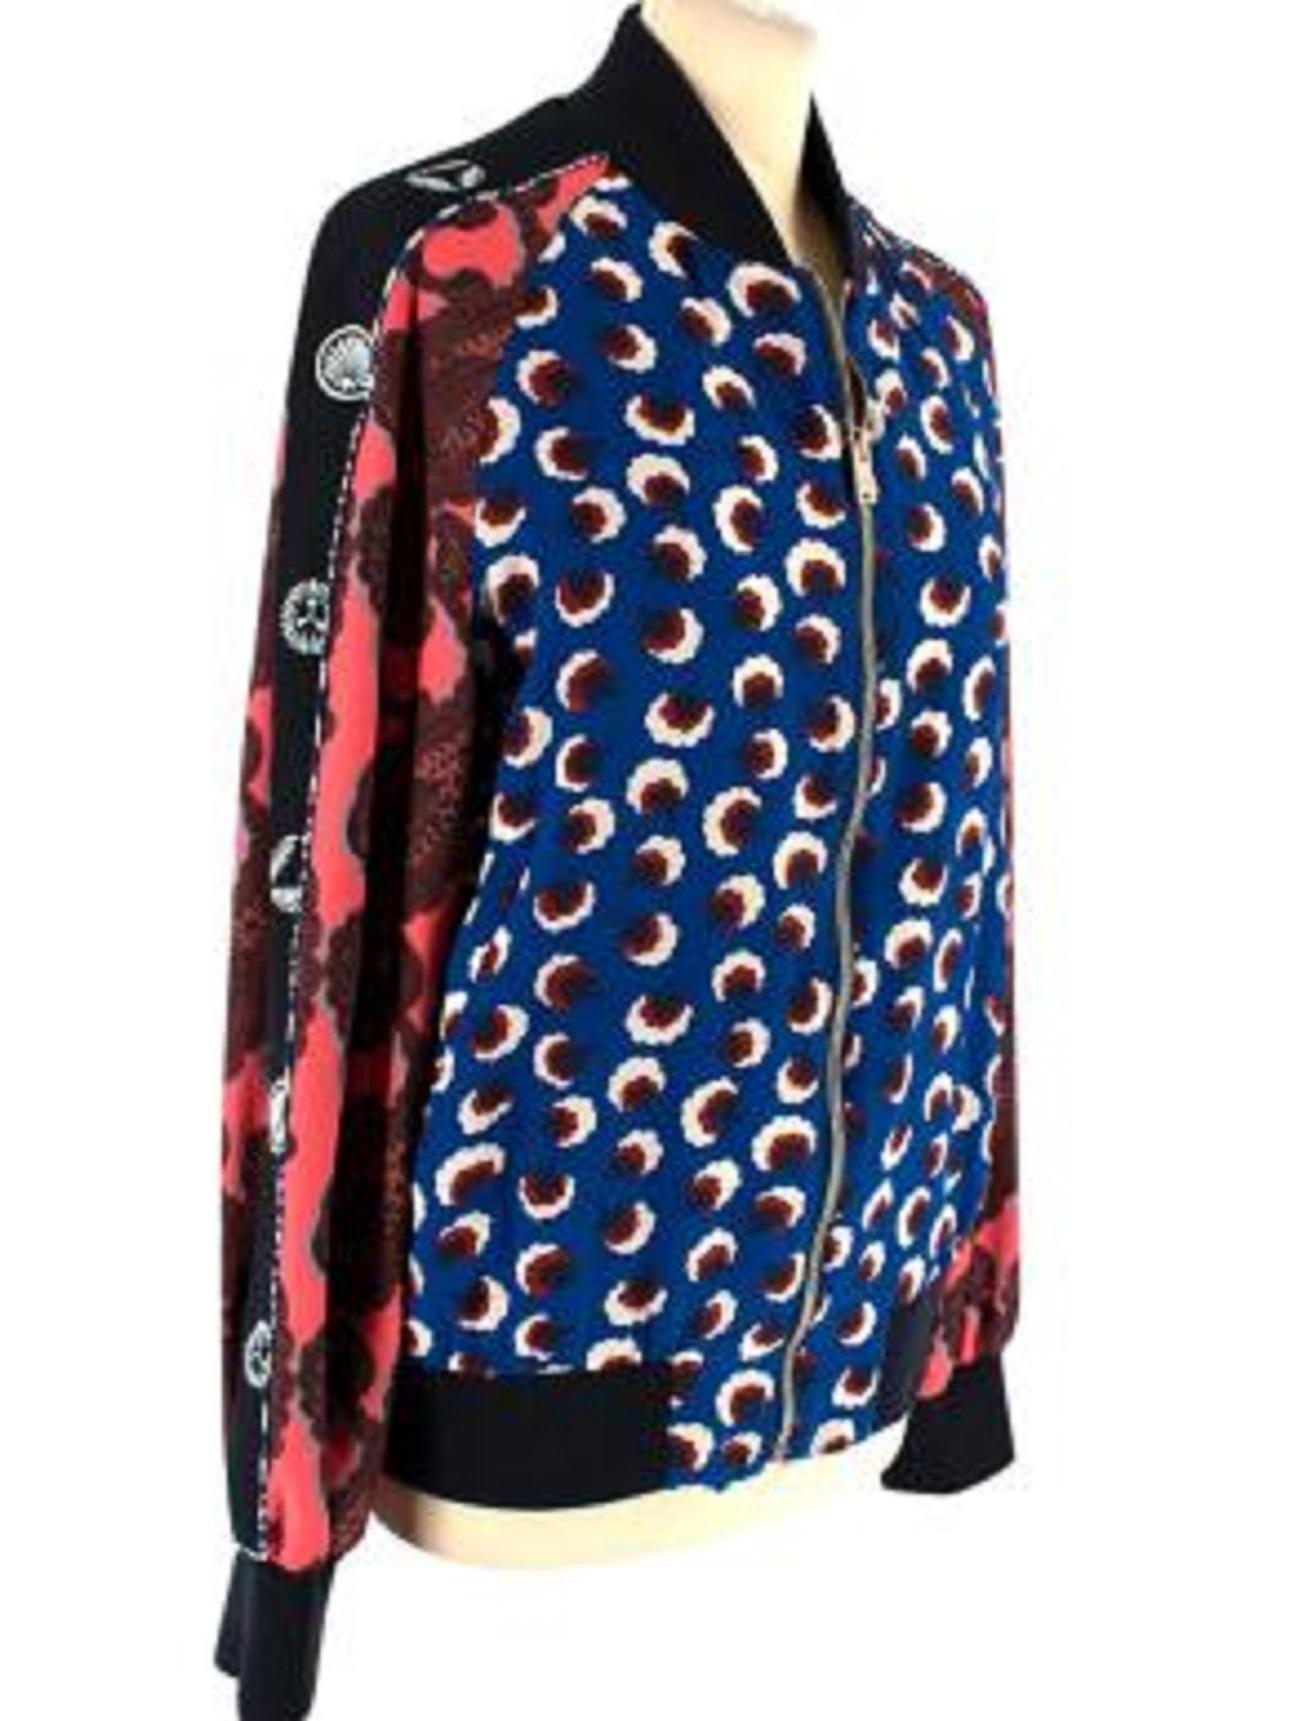 Stella McCartney Multi-Print Bomber Jacket

- Gold zip fastening
- Ribbed cuffs and neckline
- Fully lined
- Two pockets at the waist
- Blue floral printed body
- Red and black patterned sleeves

Material:
Fabric 1 (outer fabric): 100% Silk
Fabric